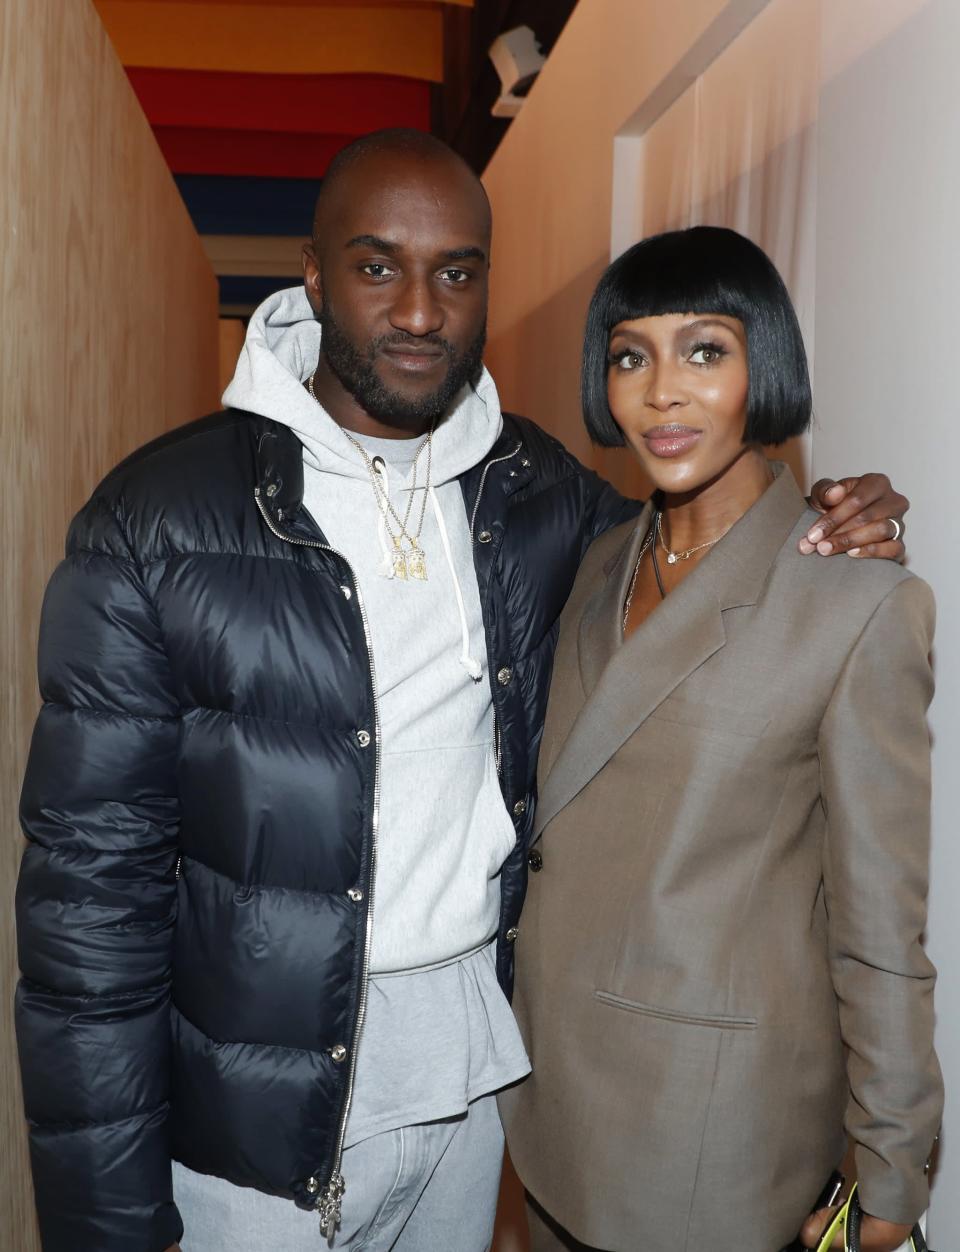 <p>On Nov. 29, <a href="https://www.instagram.com/tv/CW3lidSD7rp/" class="link rapid-noclick-resp" rel="nofollow noopener" target="_blank" data-ylk="slk:Naomi Campbell shared a lengthy tribute to Virgil">Naomi Campbell shared a lengthy tribute to Virgil</a> on her Instagram account. "Today is not the end it's the beginning of your beautiful and young legacy," part of her statement read. "You always said you were an engineer and Architect can't wait to see what you have in store for the world .this side and the other .. . It was an honor to walk for you in your. @off____white princess Diana inspired show . . . I love you always , KEEP US RISING FROM THE OTHER SIDE REST IN POWER 🕊🕊🤍🕊🕊🙏🏾. #LIVEYOURDREAMS 📸@kloss_films @edward_enninful @britishvogue"</p>